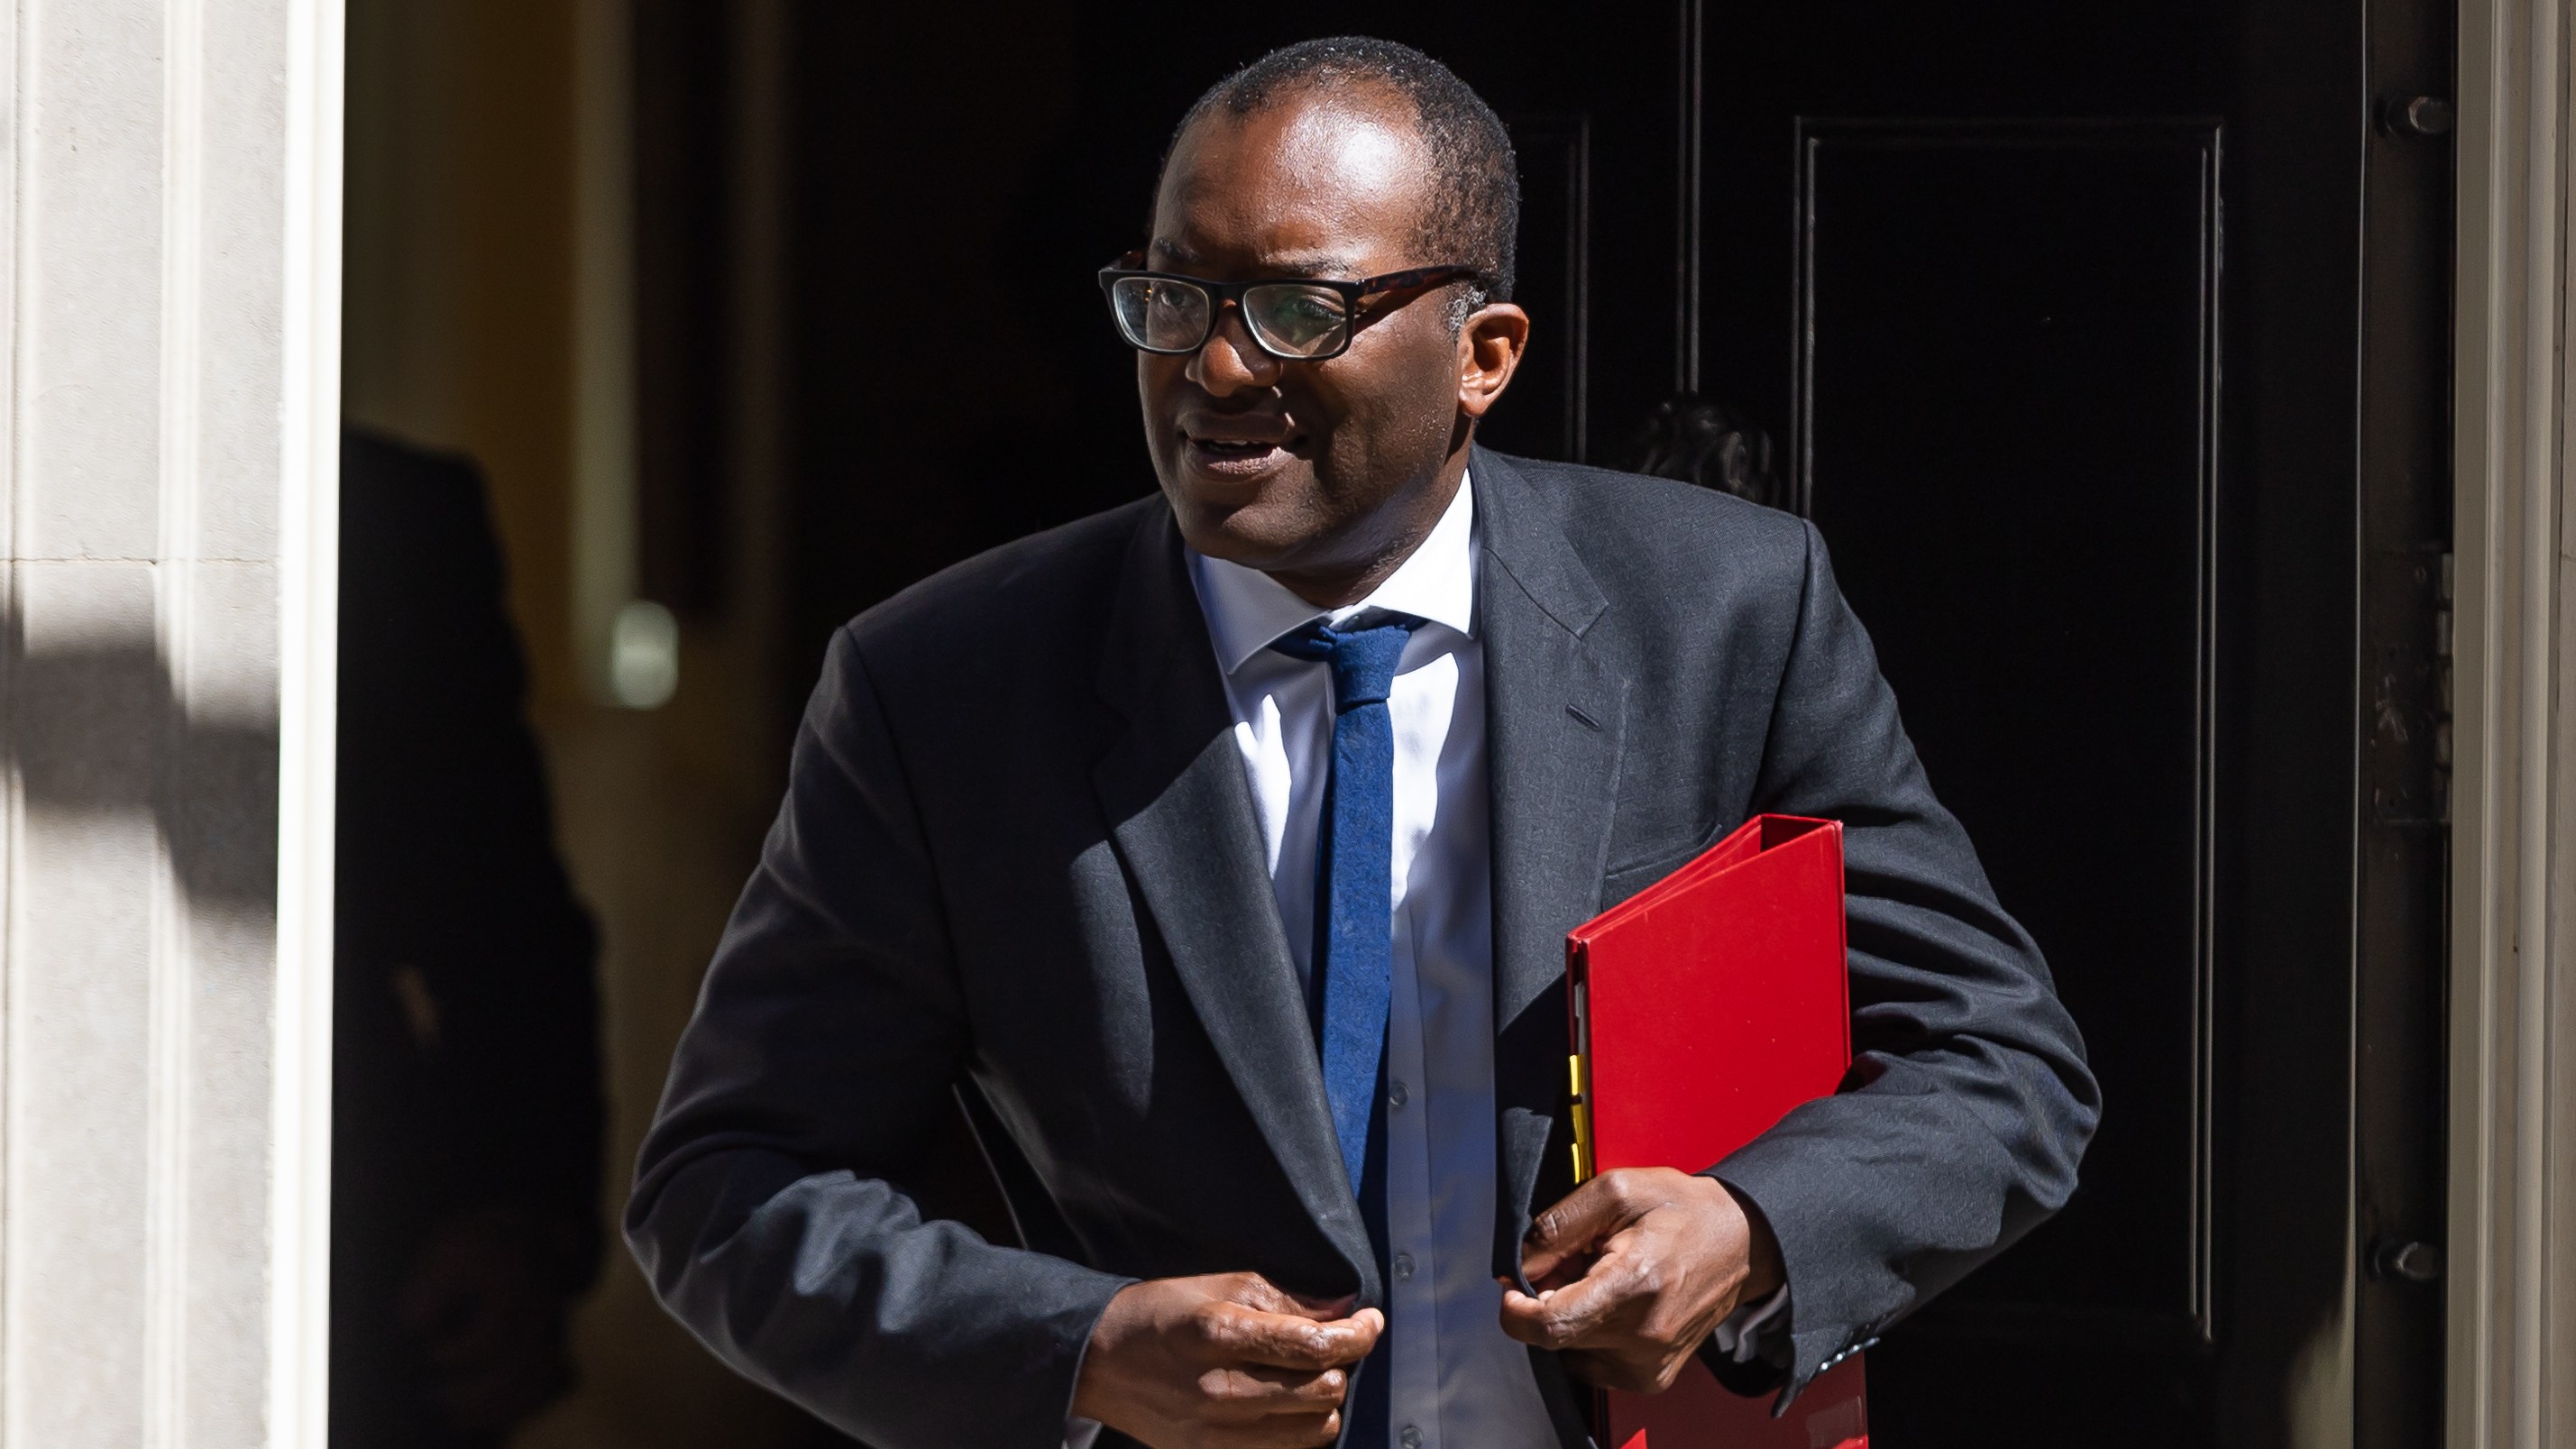 Cabinet reshuffle delayed until autumn